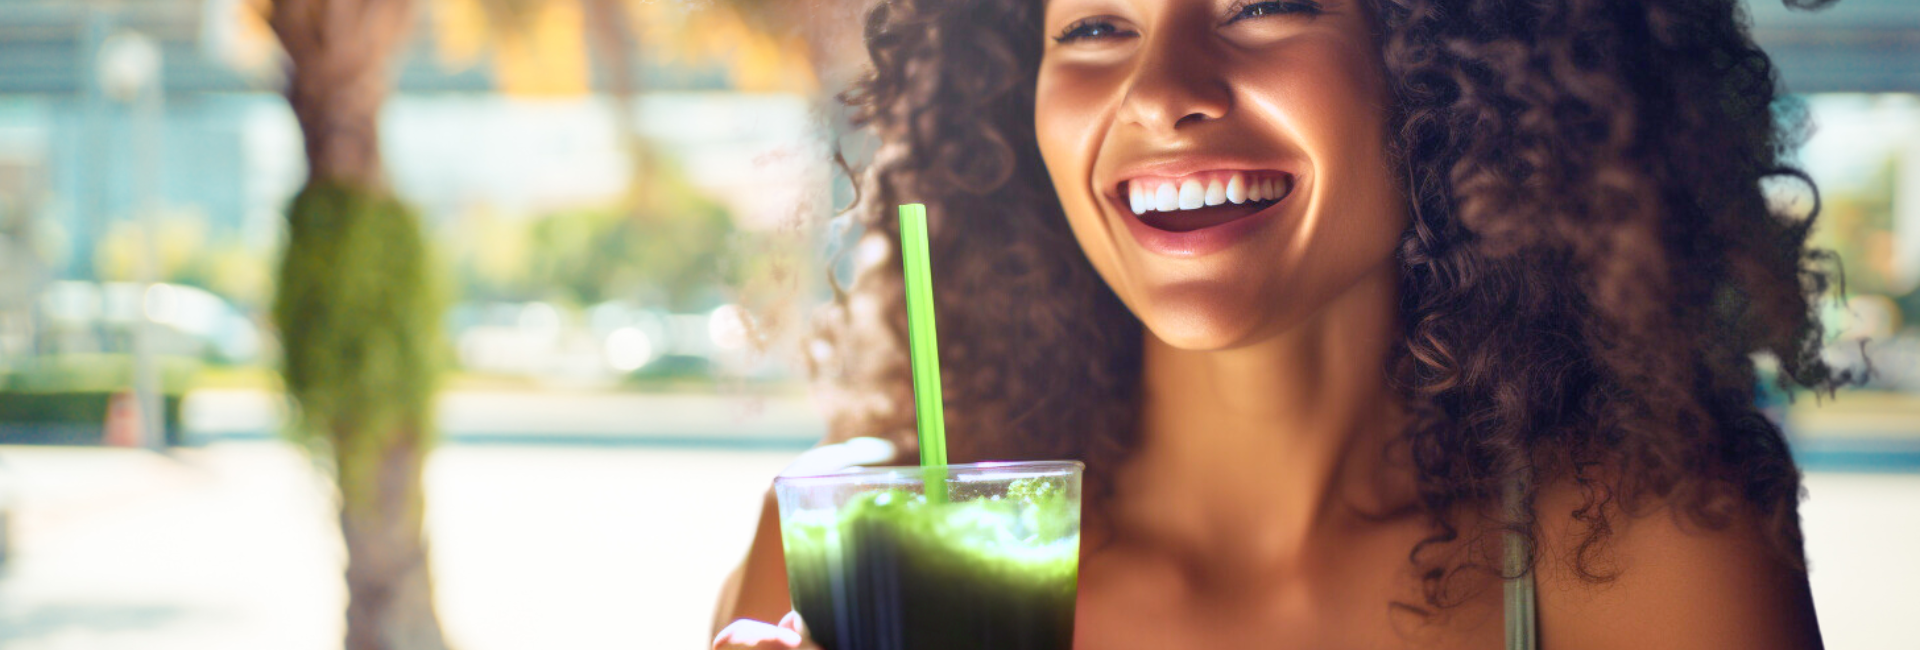 A delighted young woman beams with genuine joy as she wholeheartedly sips a refreshing green juice.